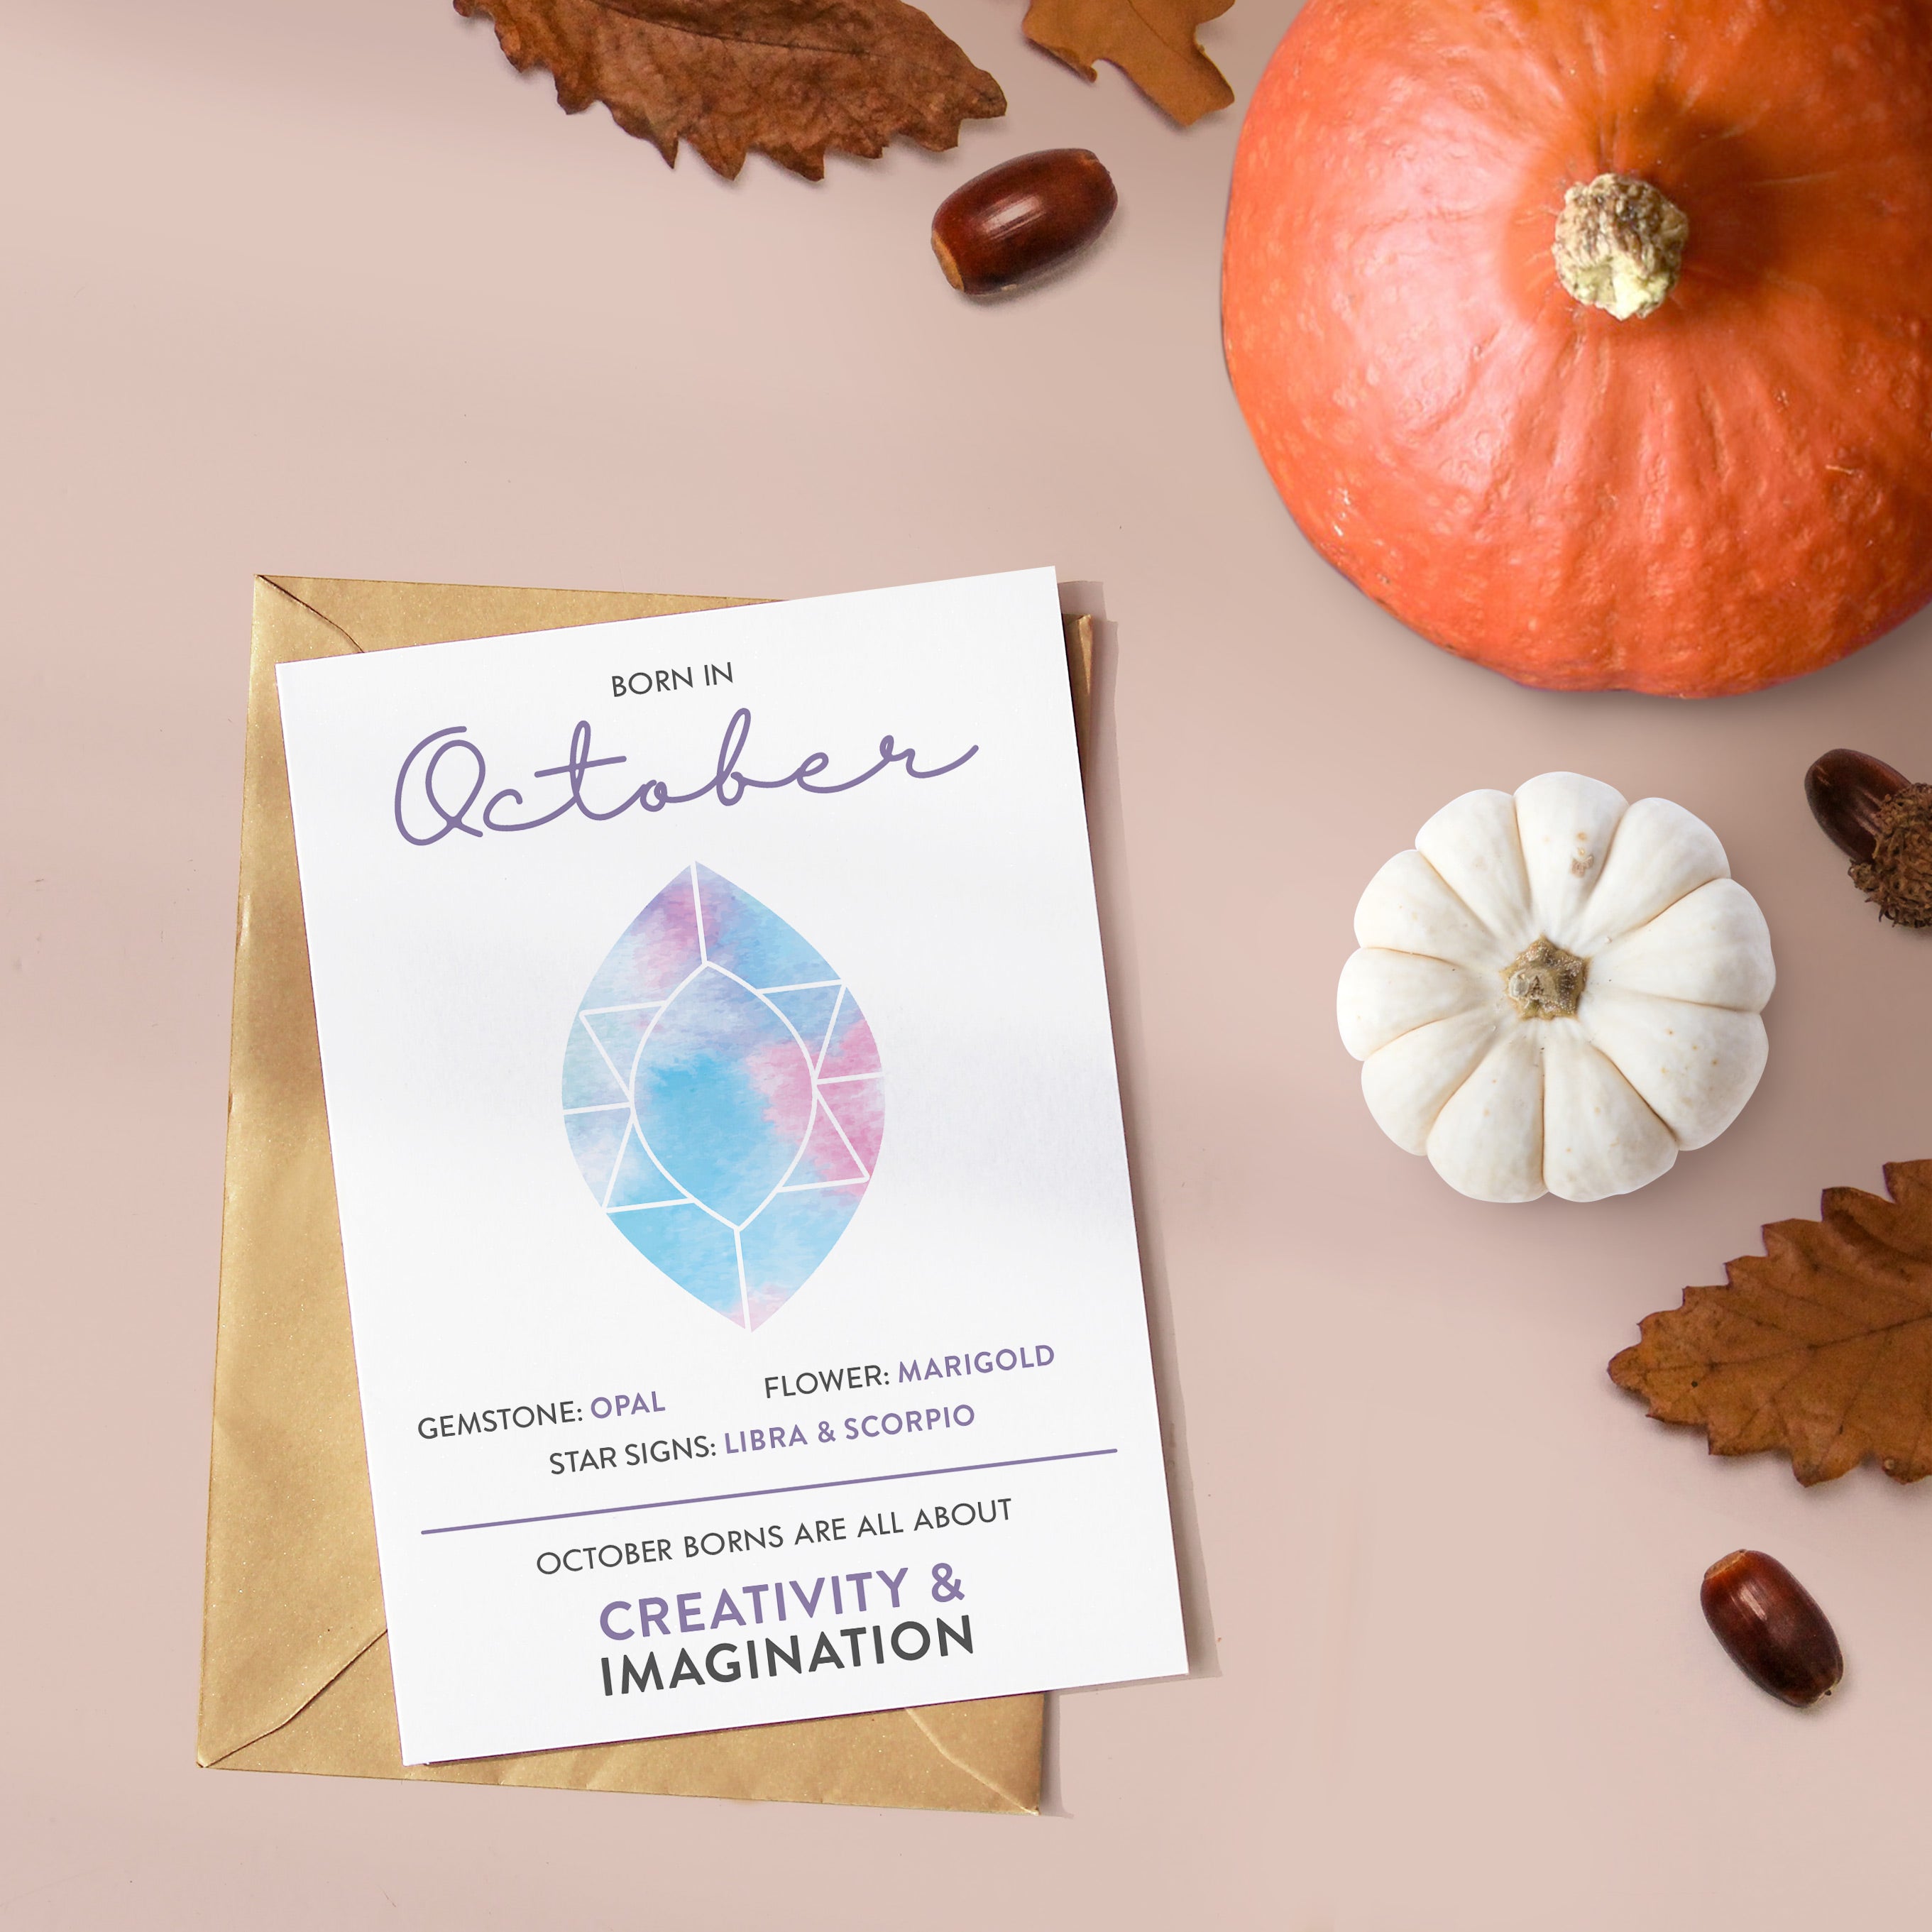 October Birthday Card with October Birth Stone, October Birth Flower and fun facts